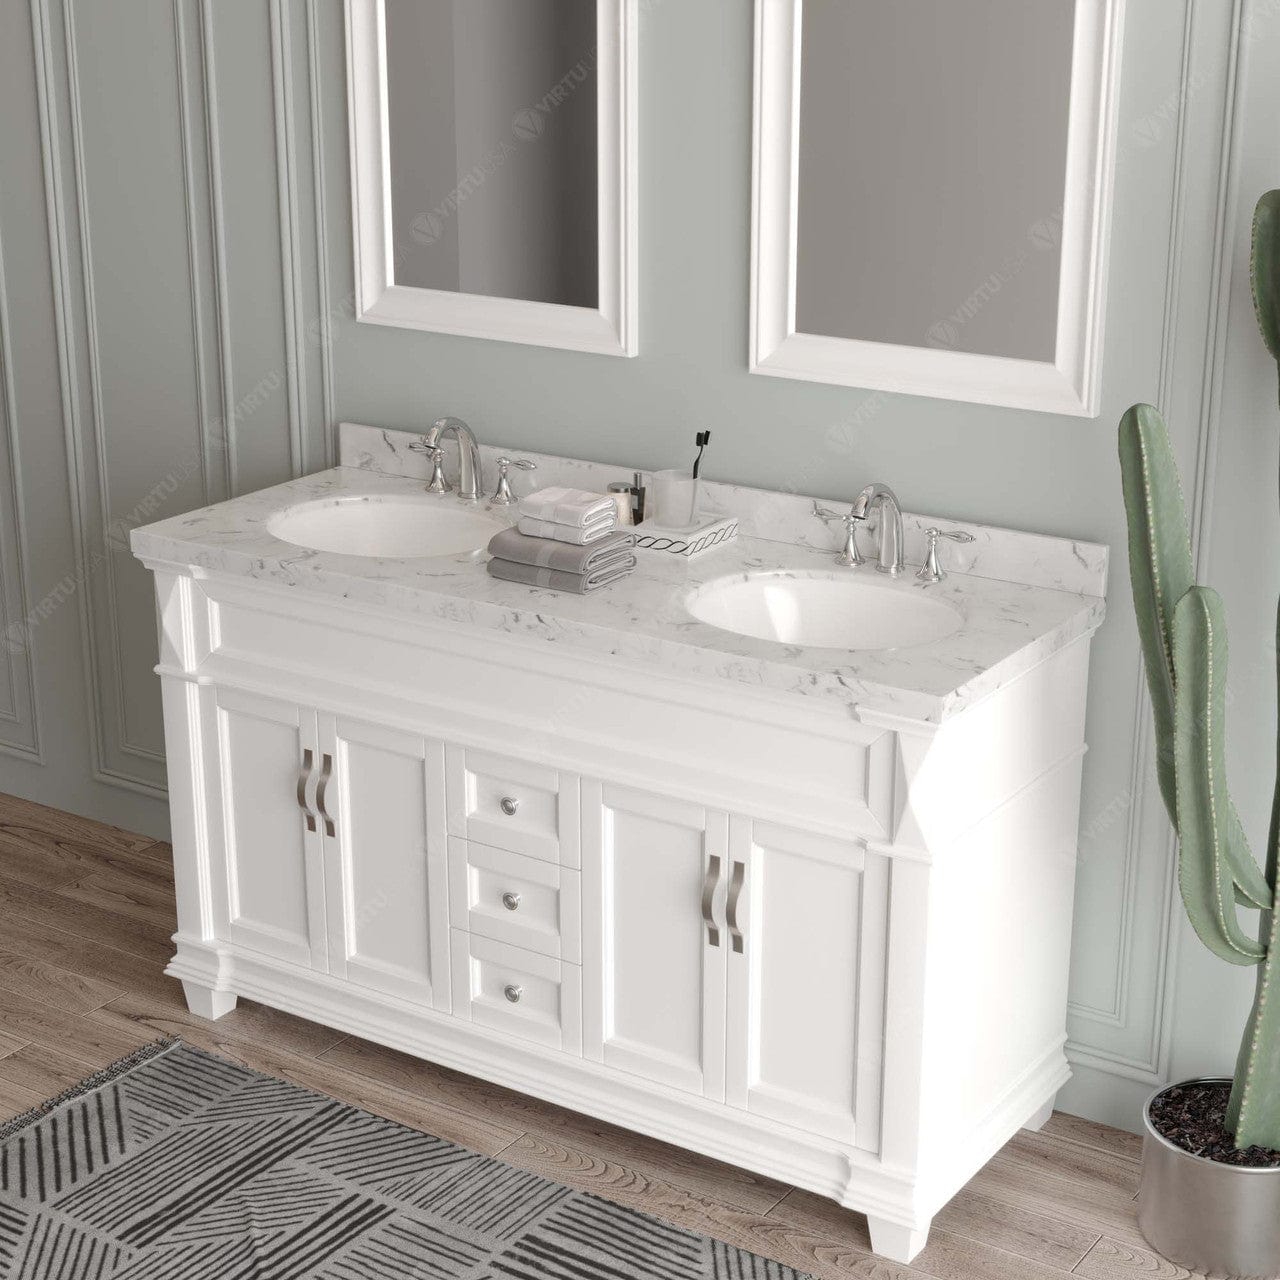 Victoria 60" Bath Vanity in White with Cultured Marble Quartz Top by Virtu USA side view